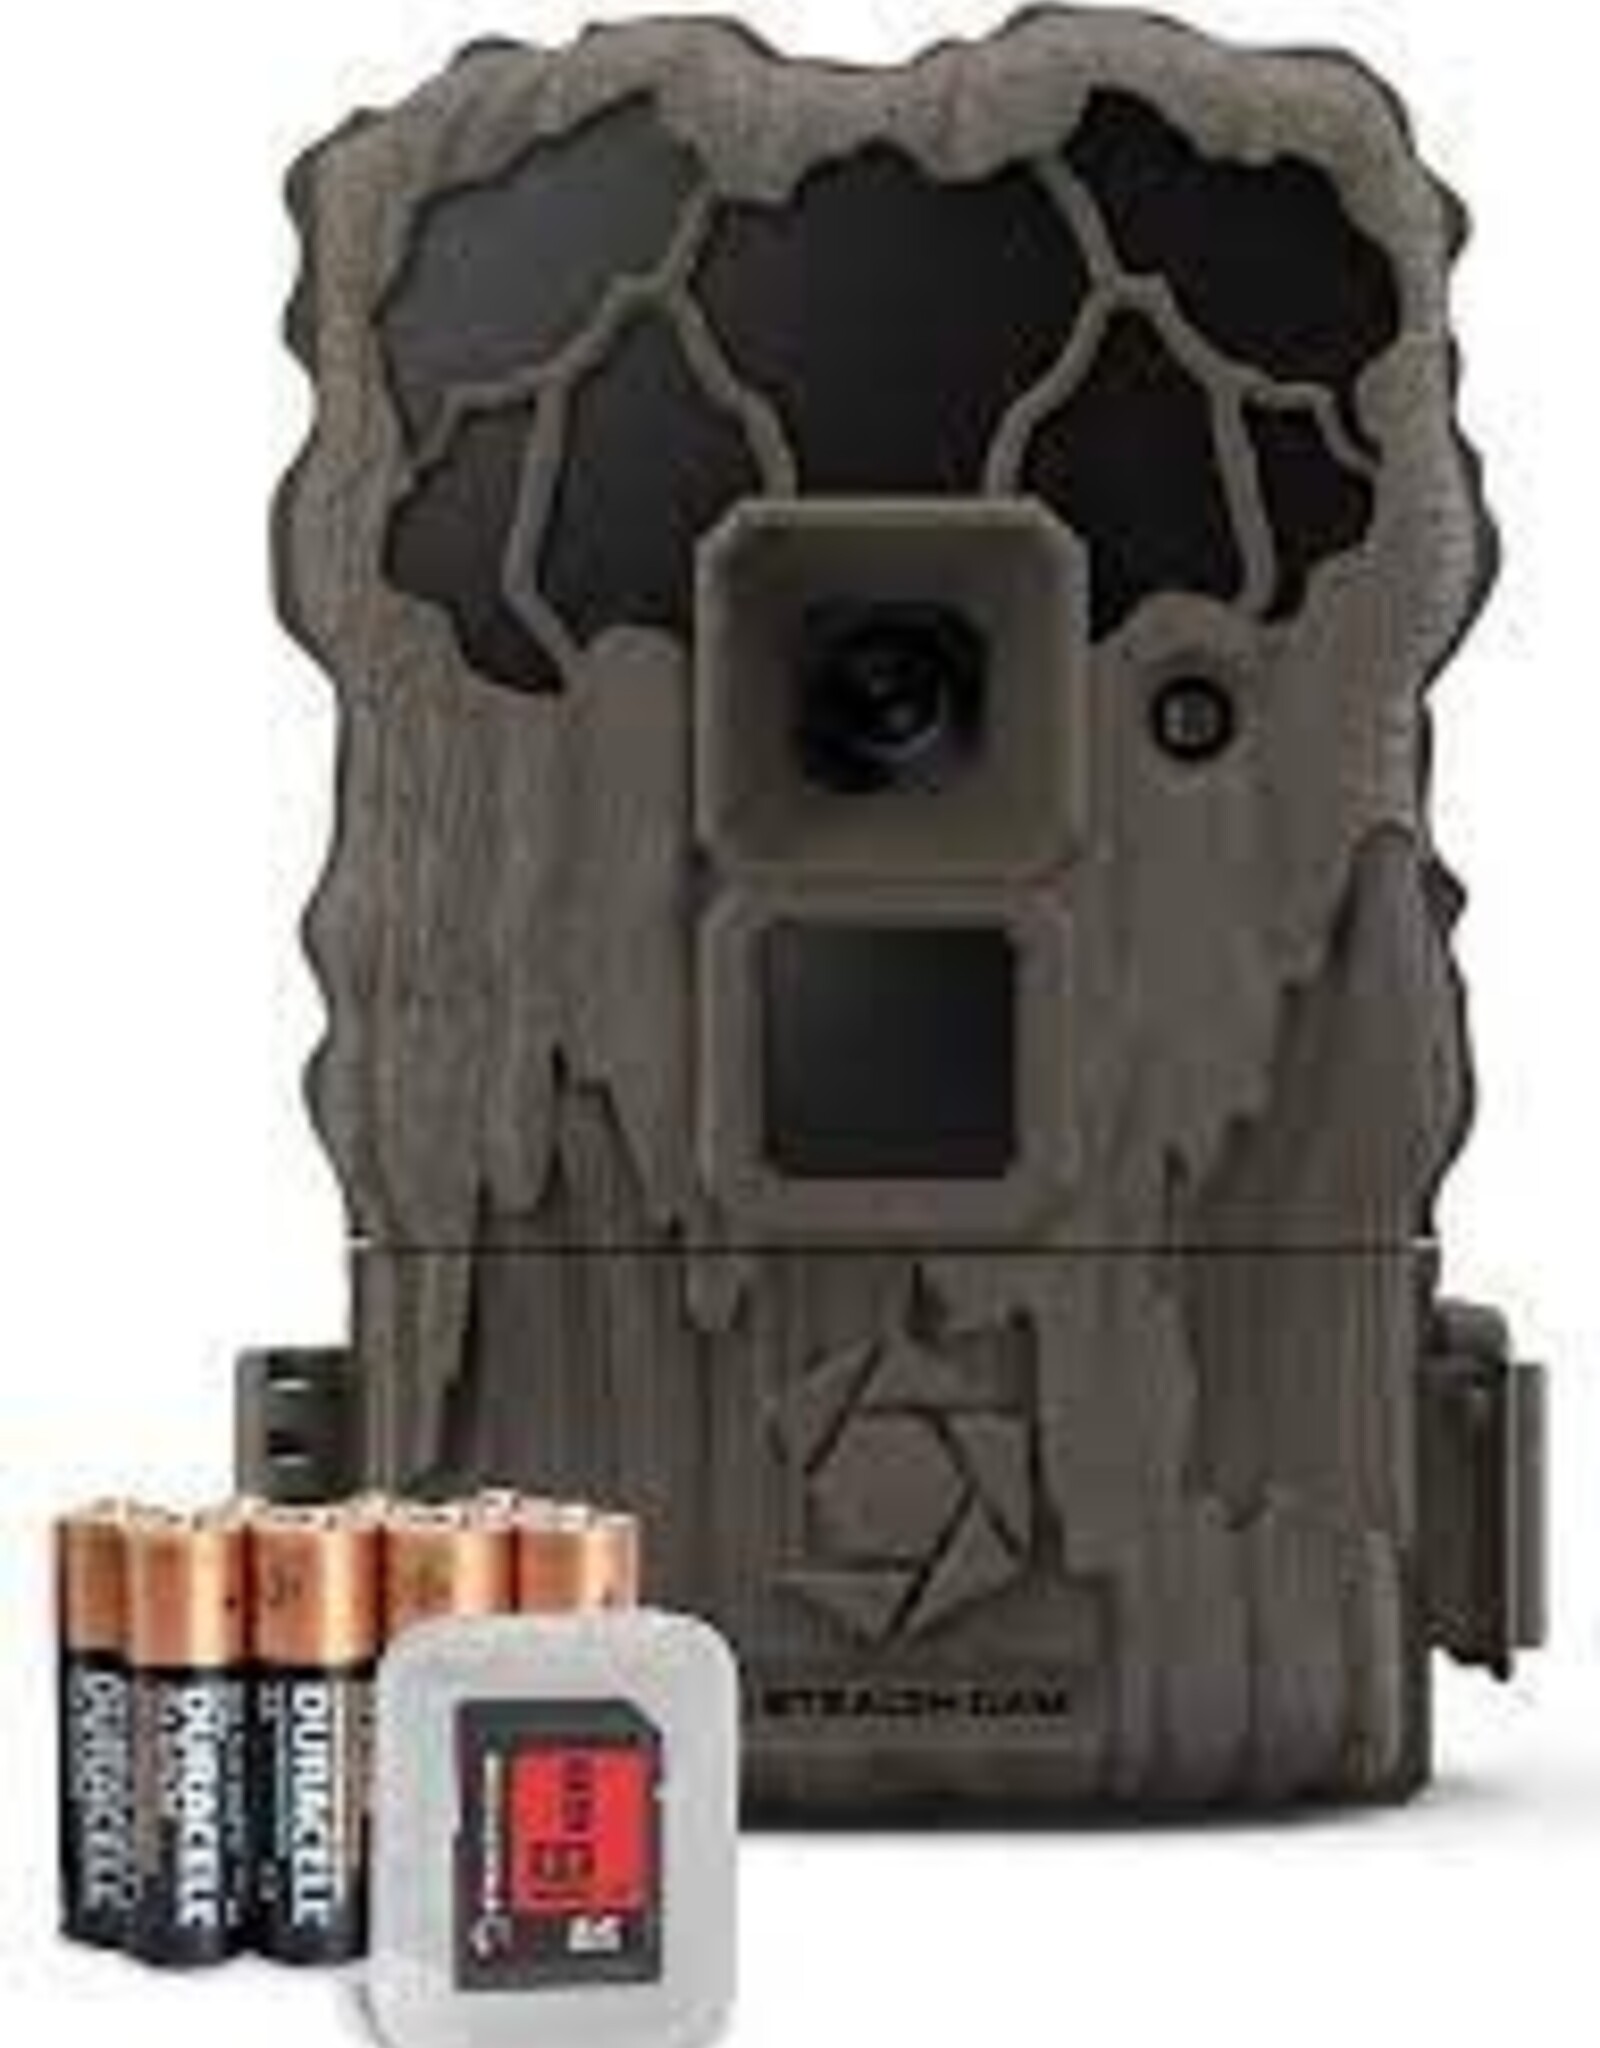 Stealth Cam QS20 Infrared Trail Camera Combo Kit